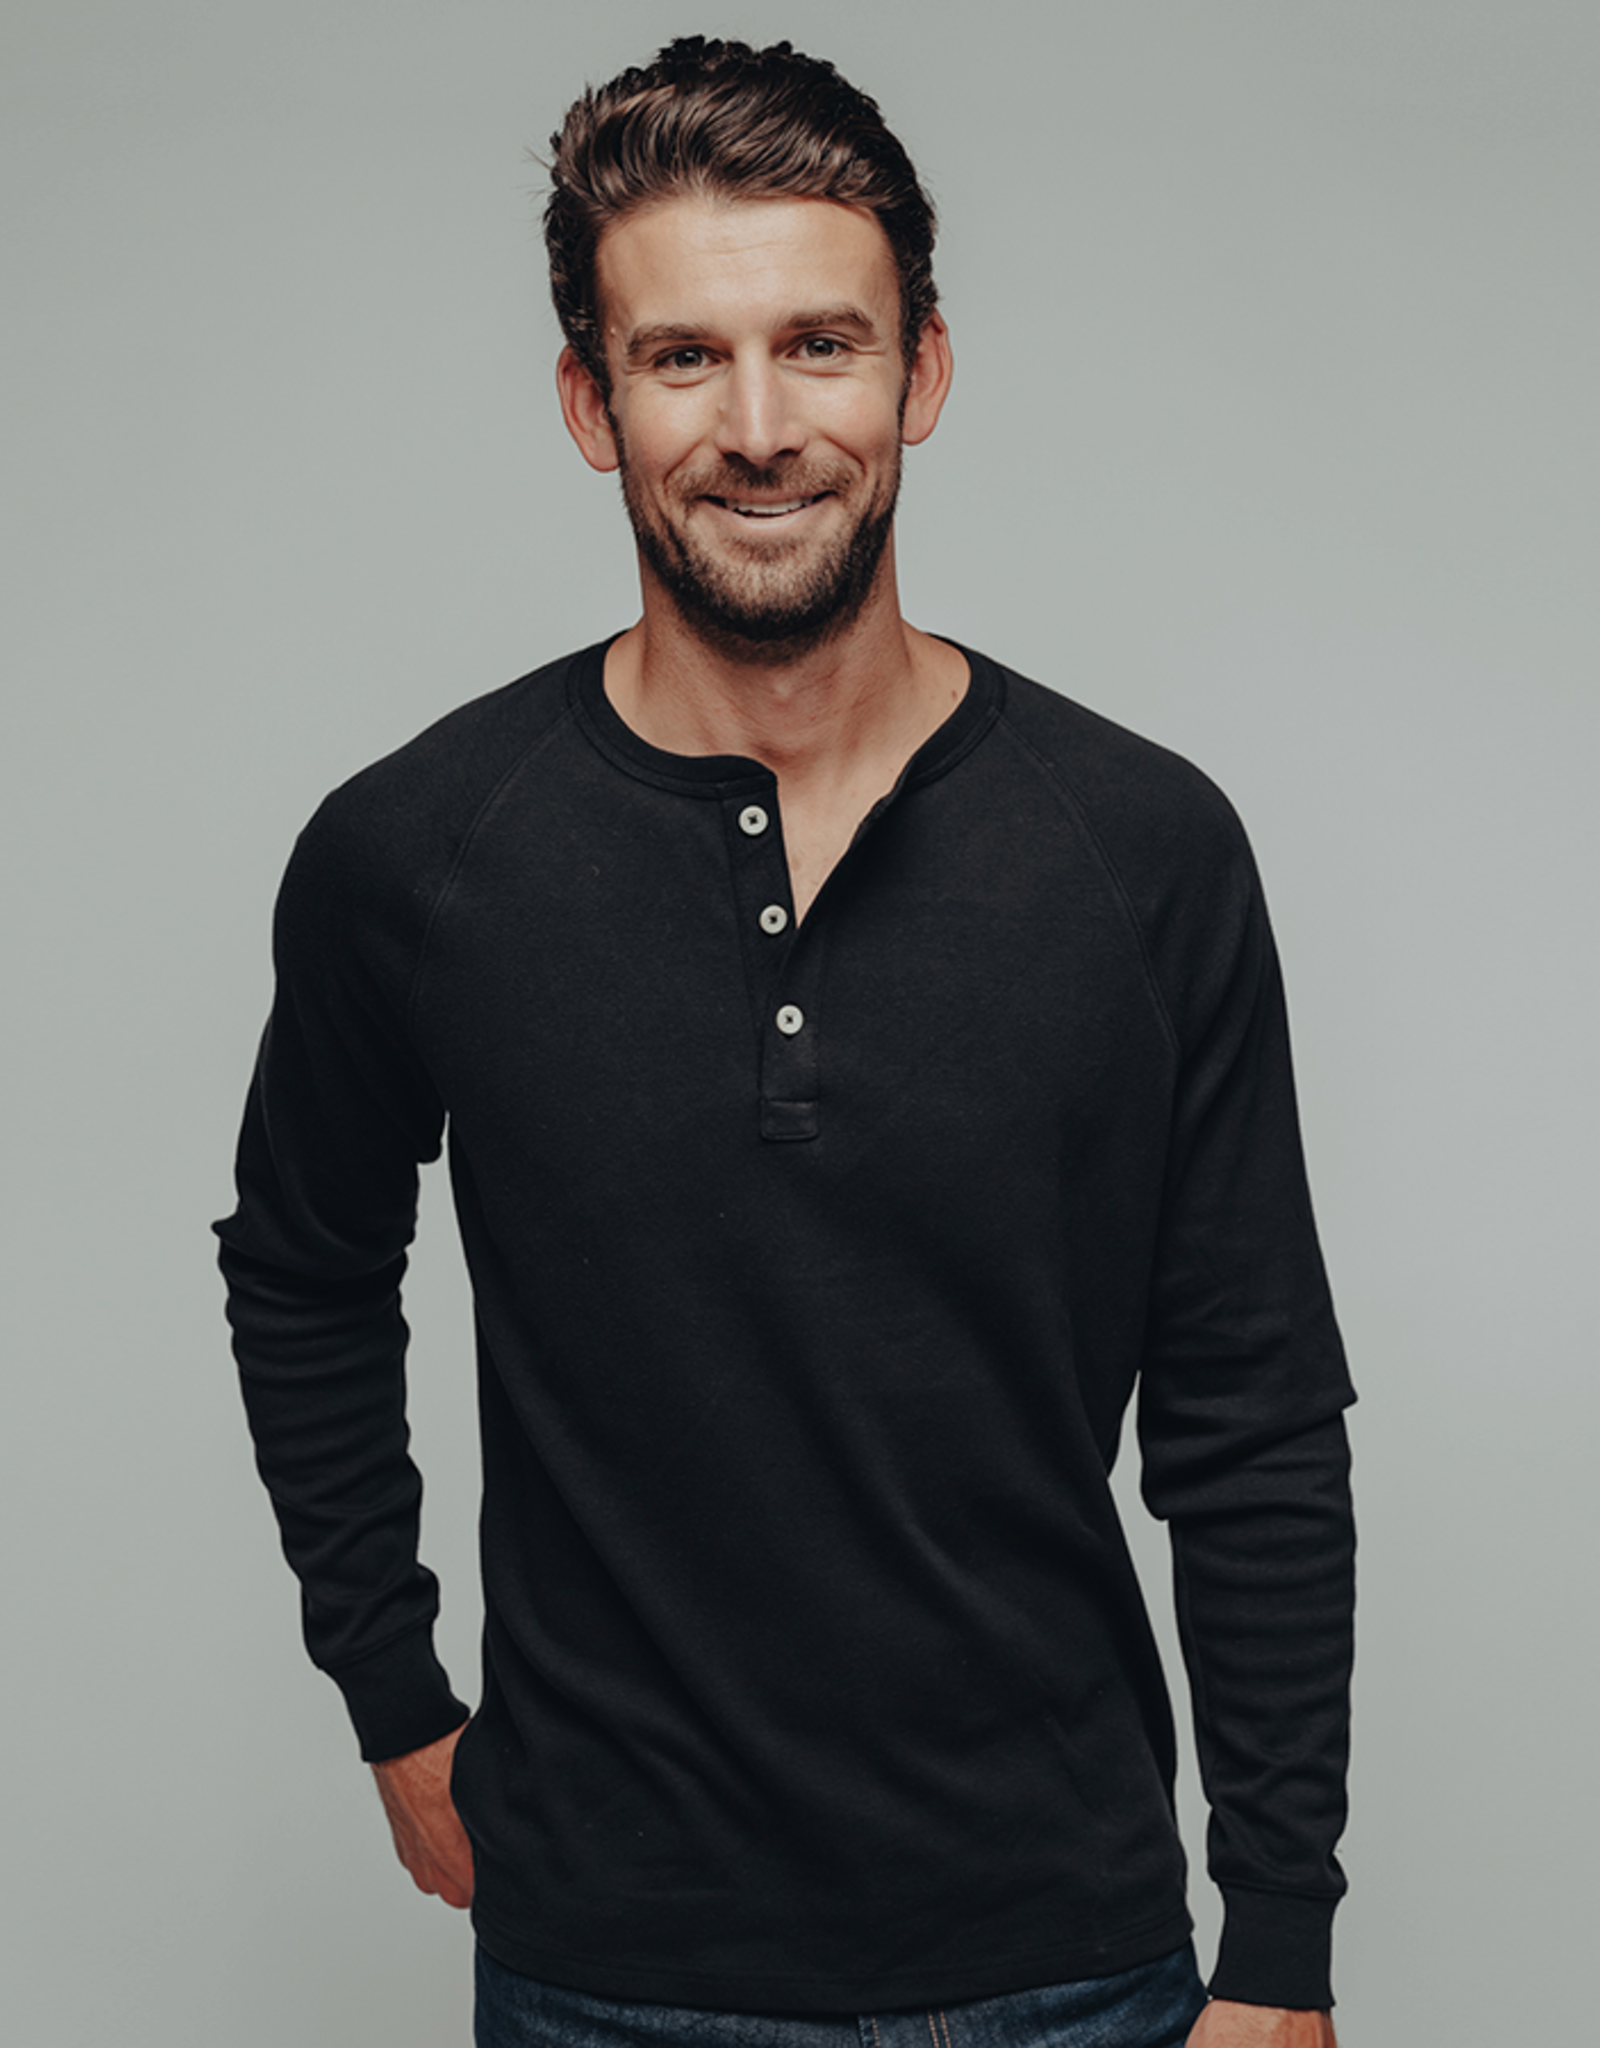 The Normal Brand LS Puremeso Henley